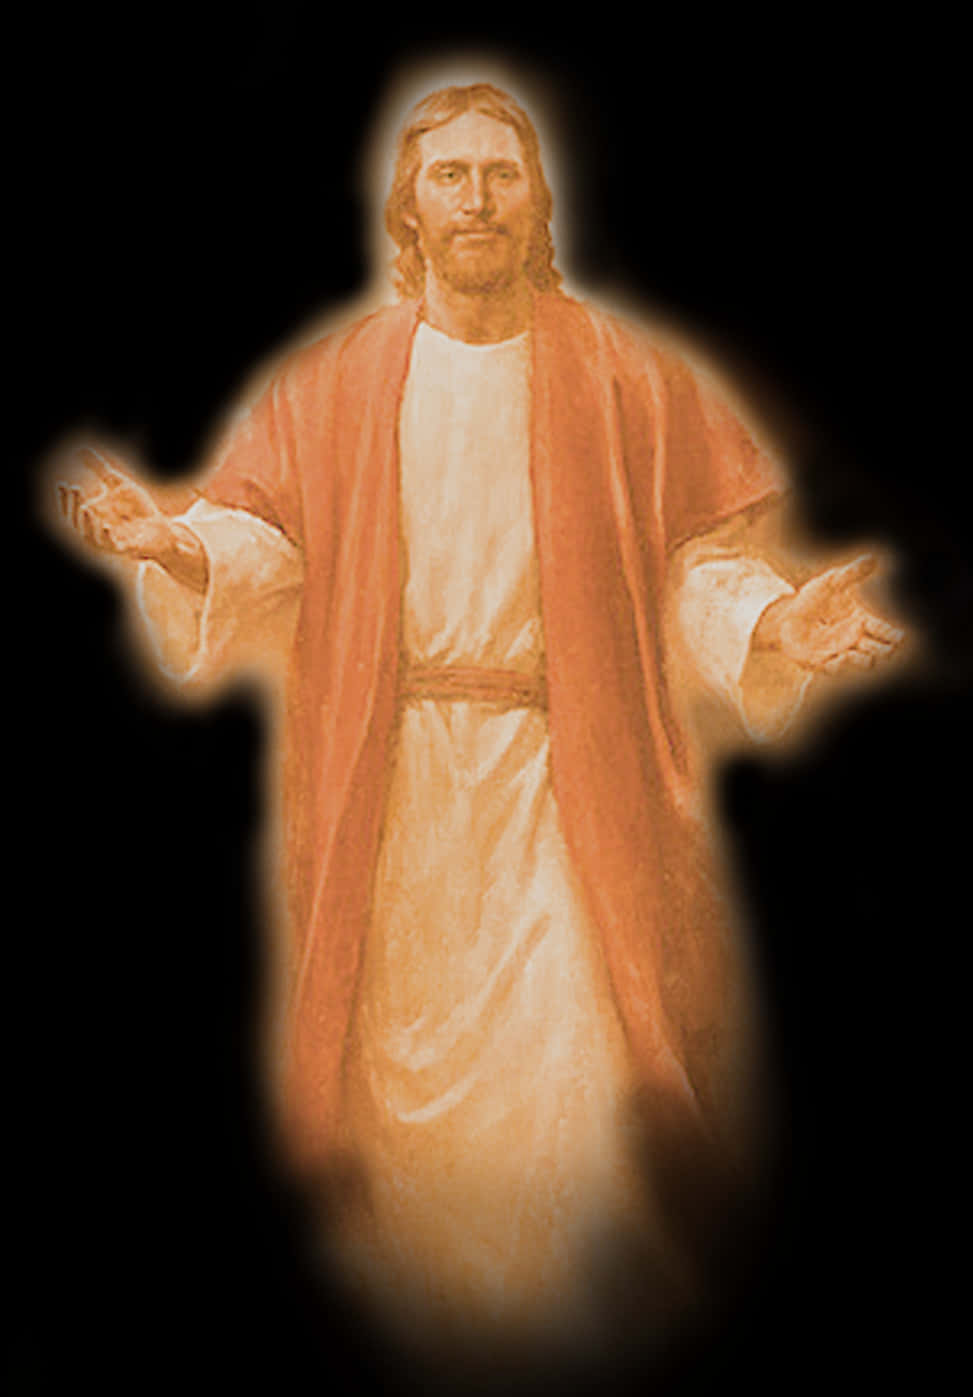 A Man In A Robe With His Arms Out